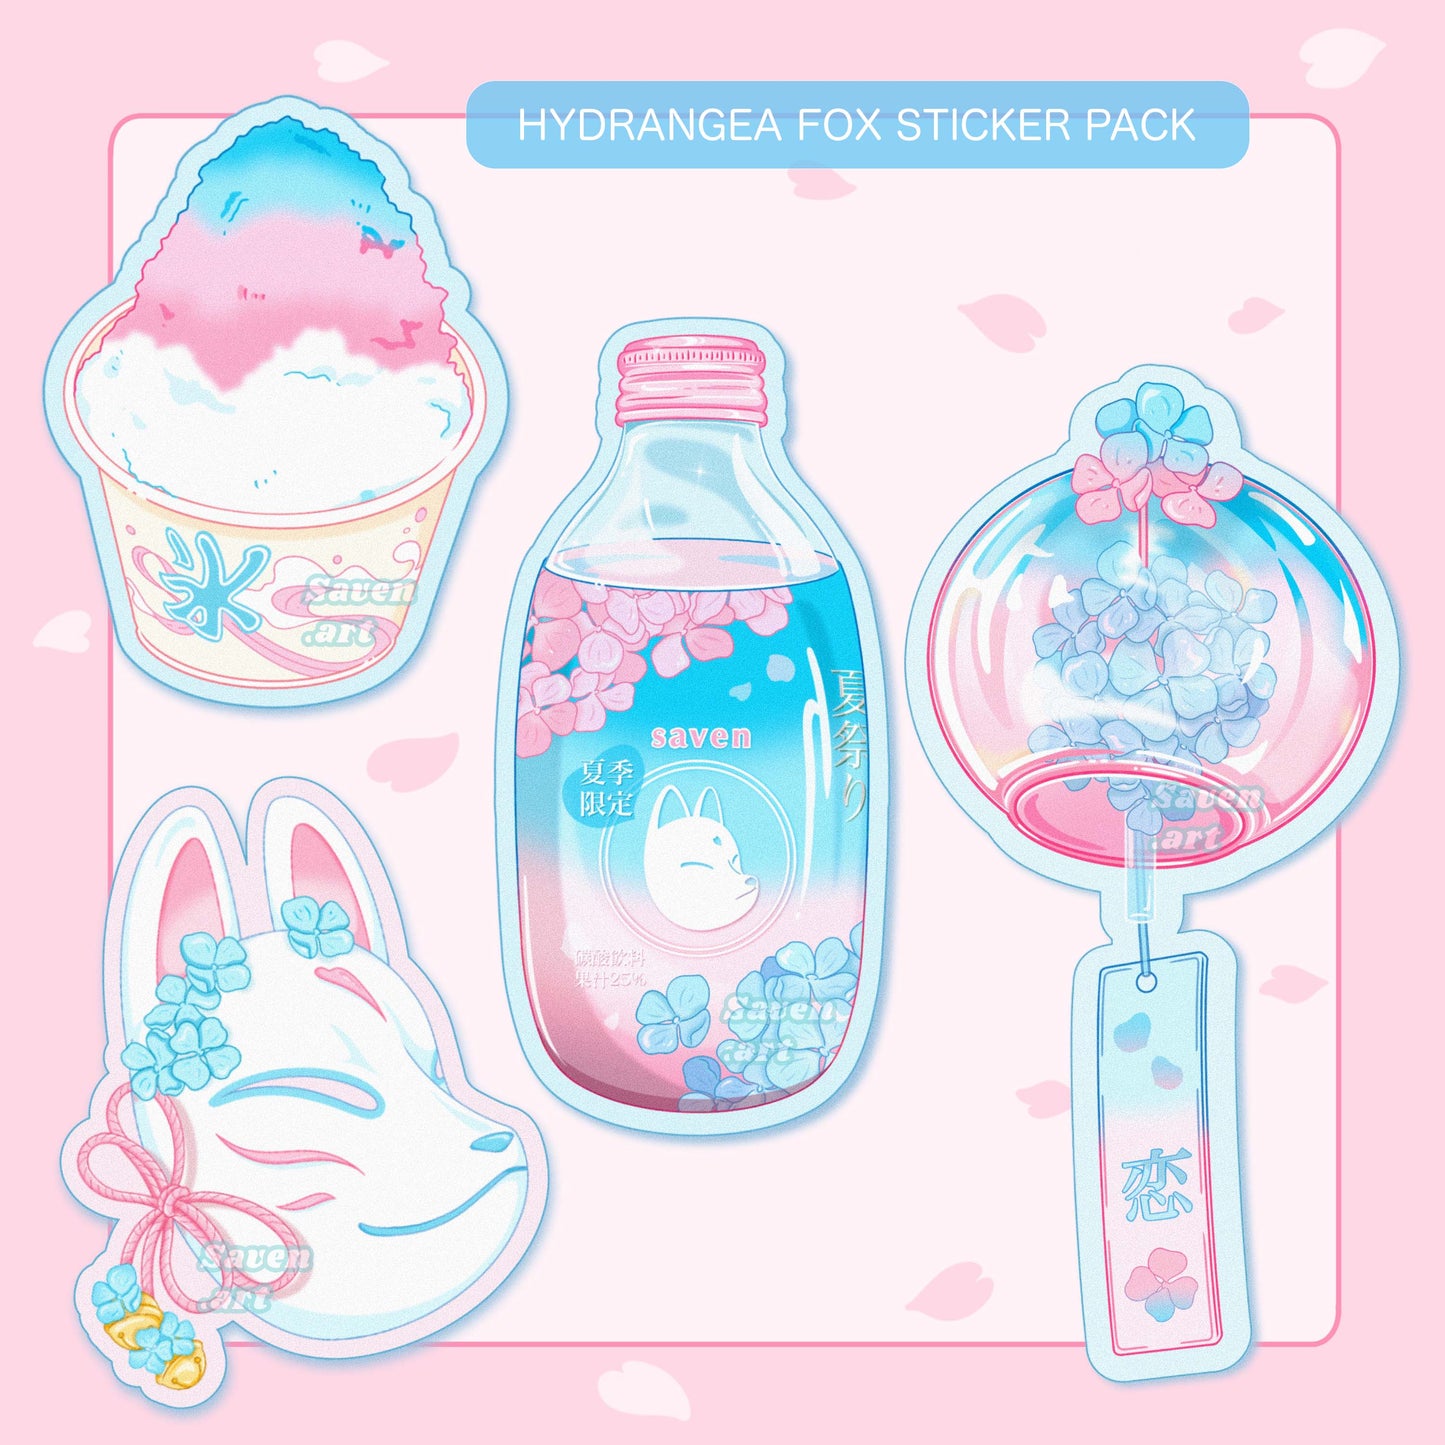 Shave Ice Stickers